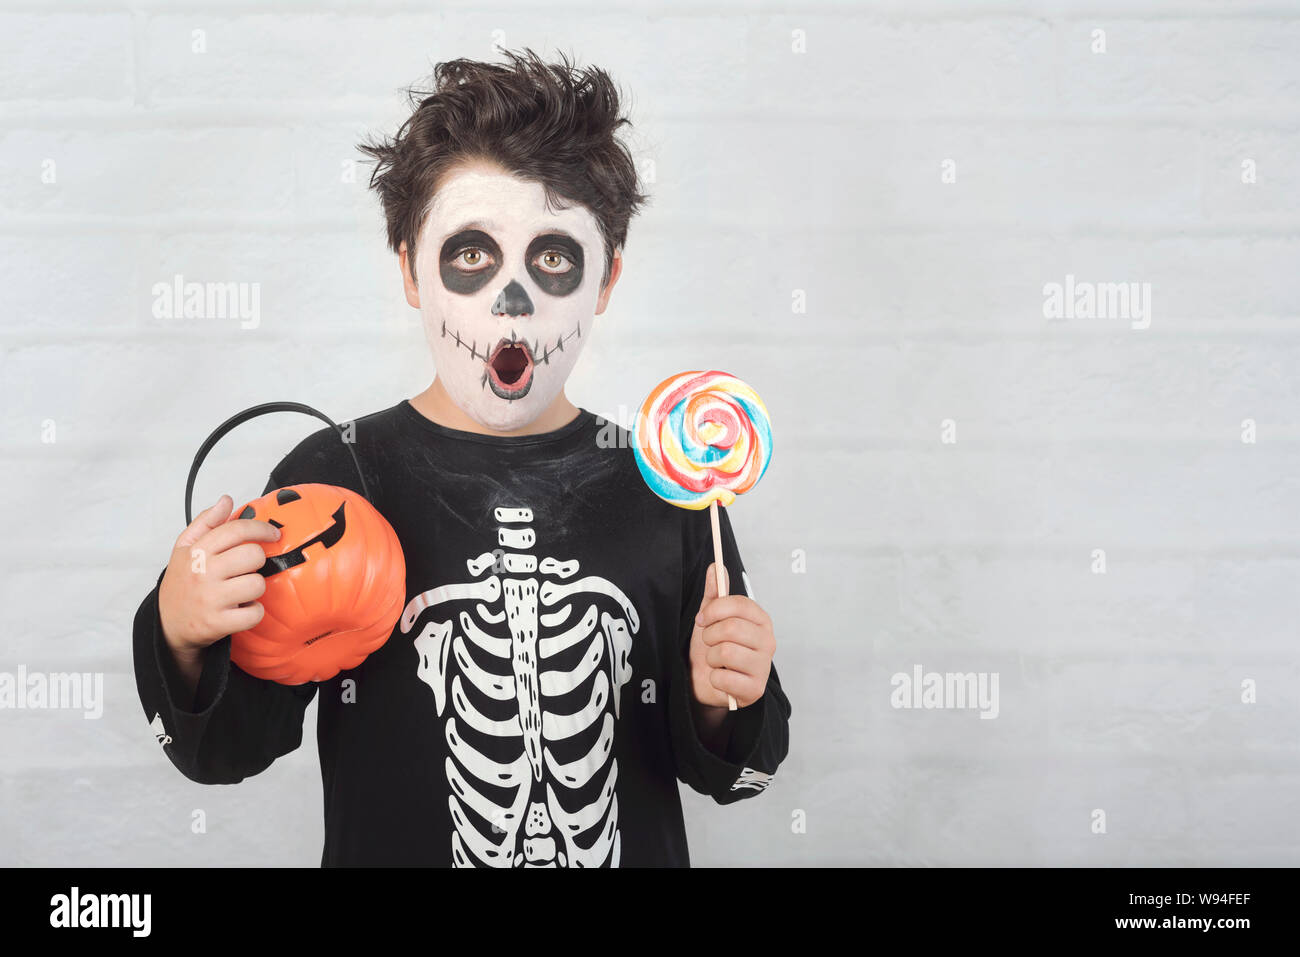 Happy Halloween.funny child in a skeleton costume eating lollipop in halloween against brick background Stock Photo